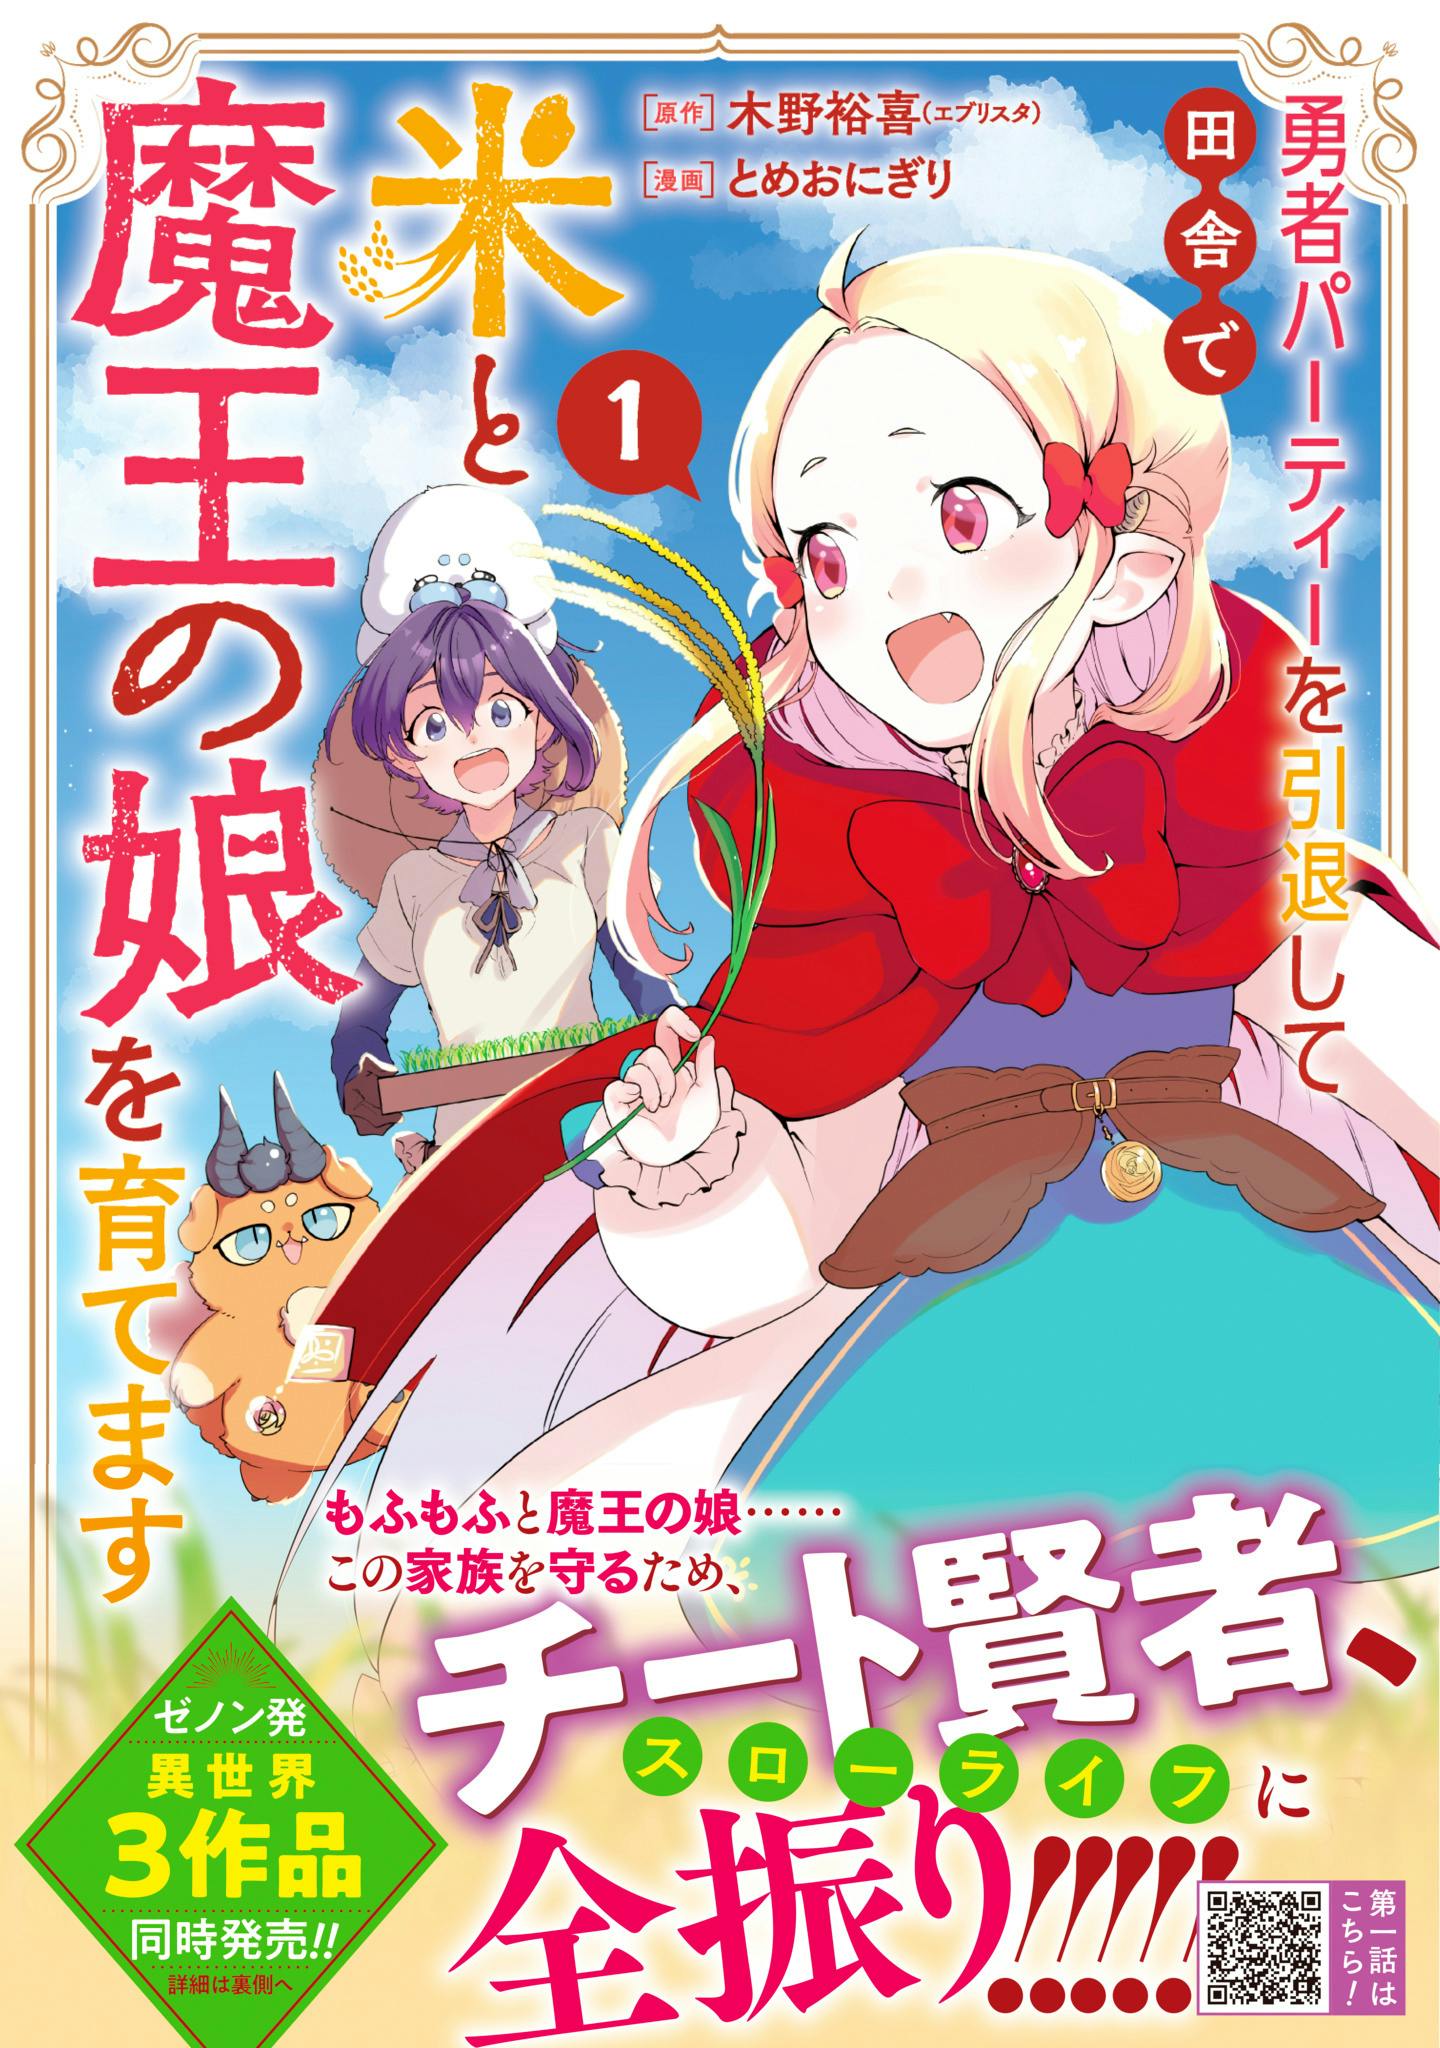 A former "JA employee" leads a slow life in another world, "I retire from the hero party and raise rice and the devil's daughter in the countryside" Volume 1 is now on sale!